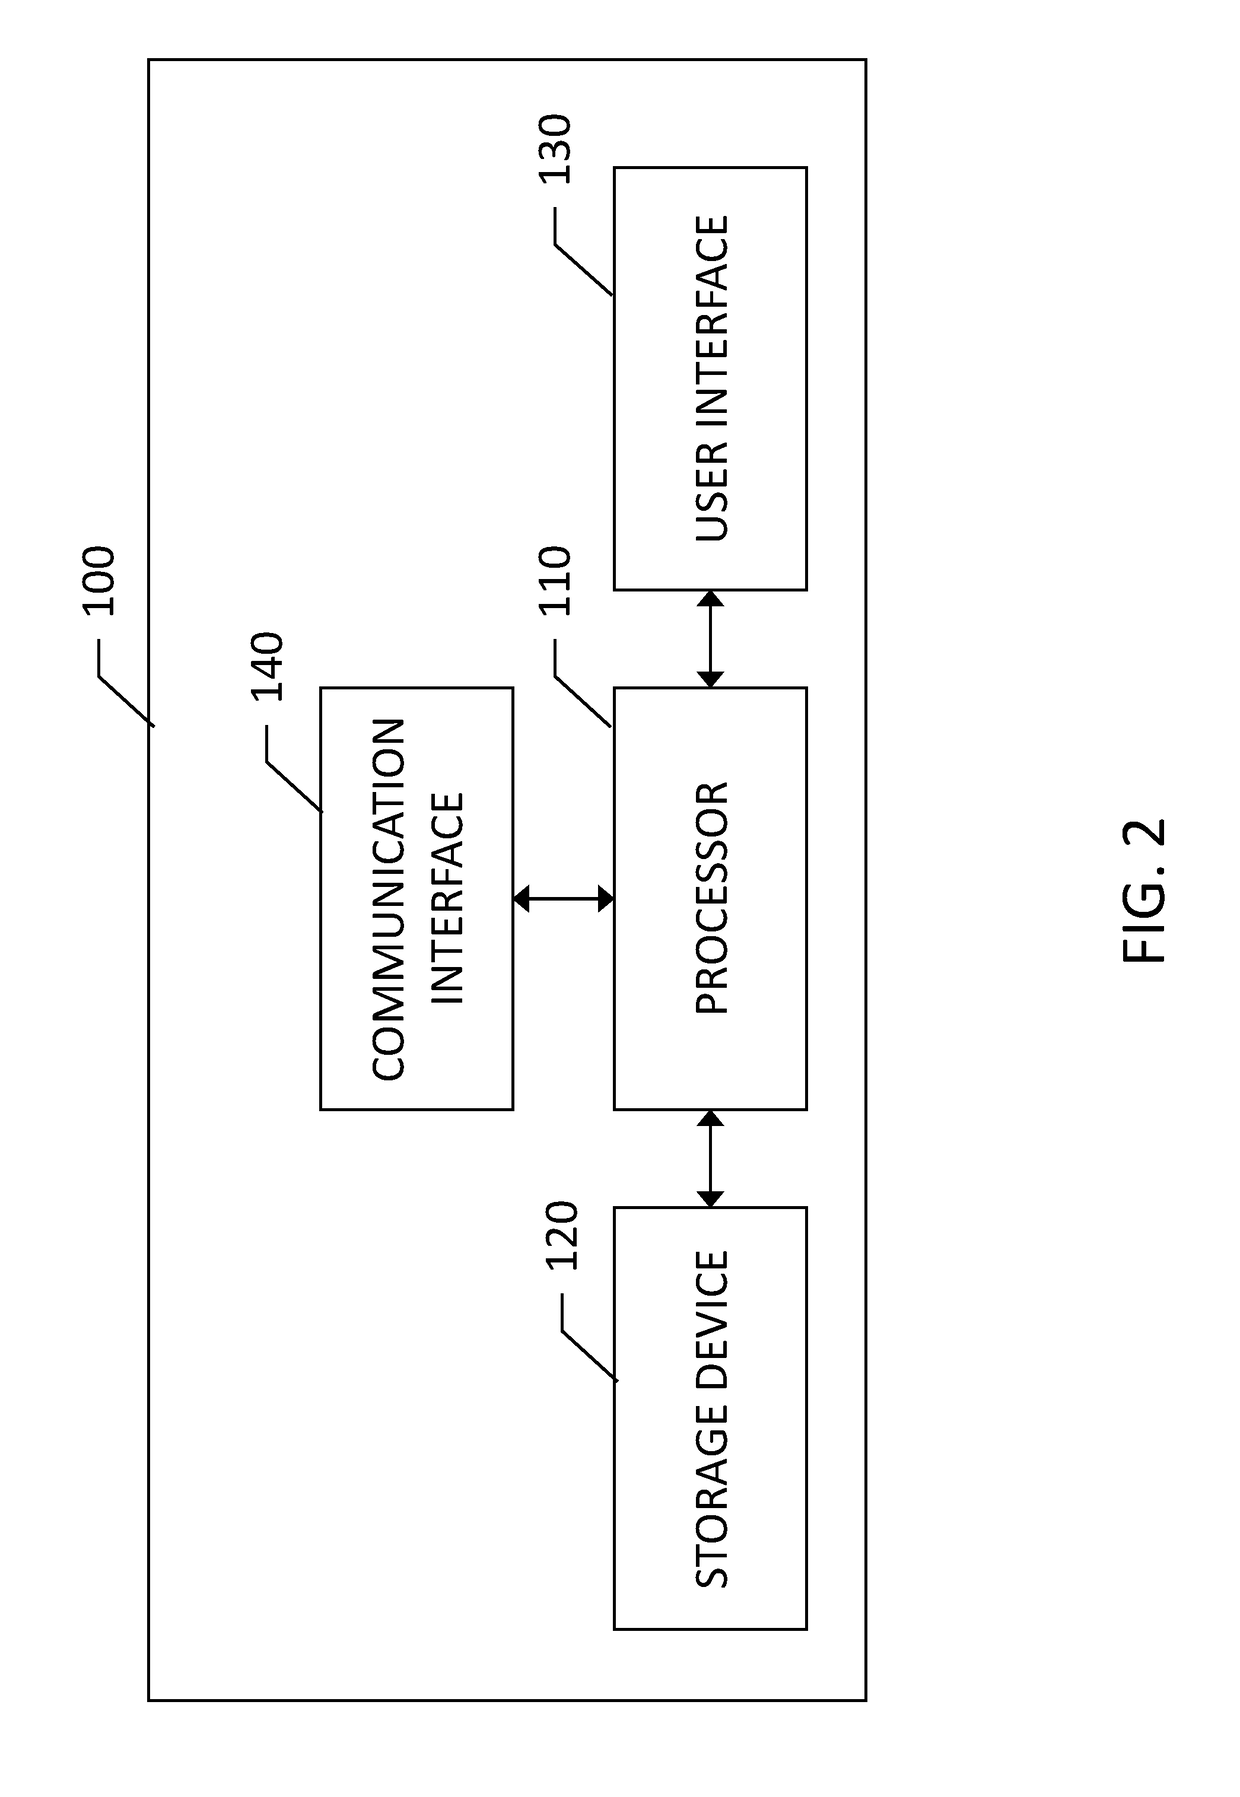 Method, system, and apparatus for improving likelihood of first-fill of a medication prescription